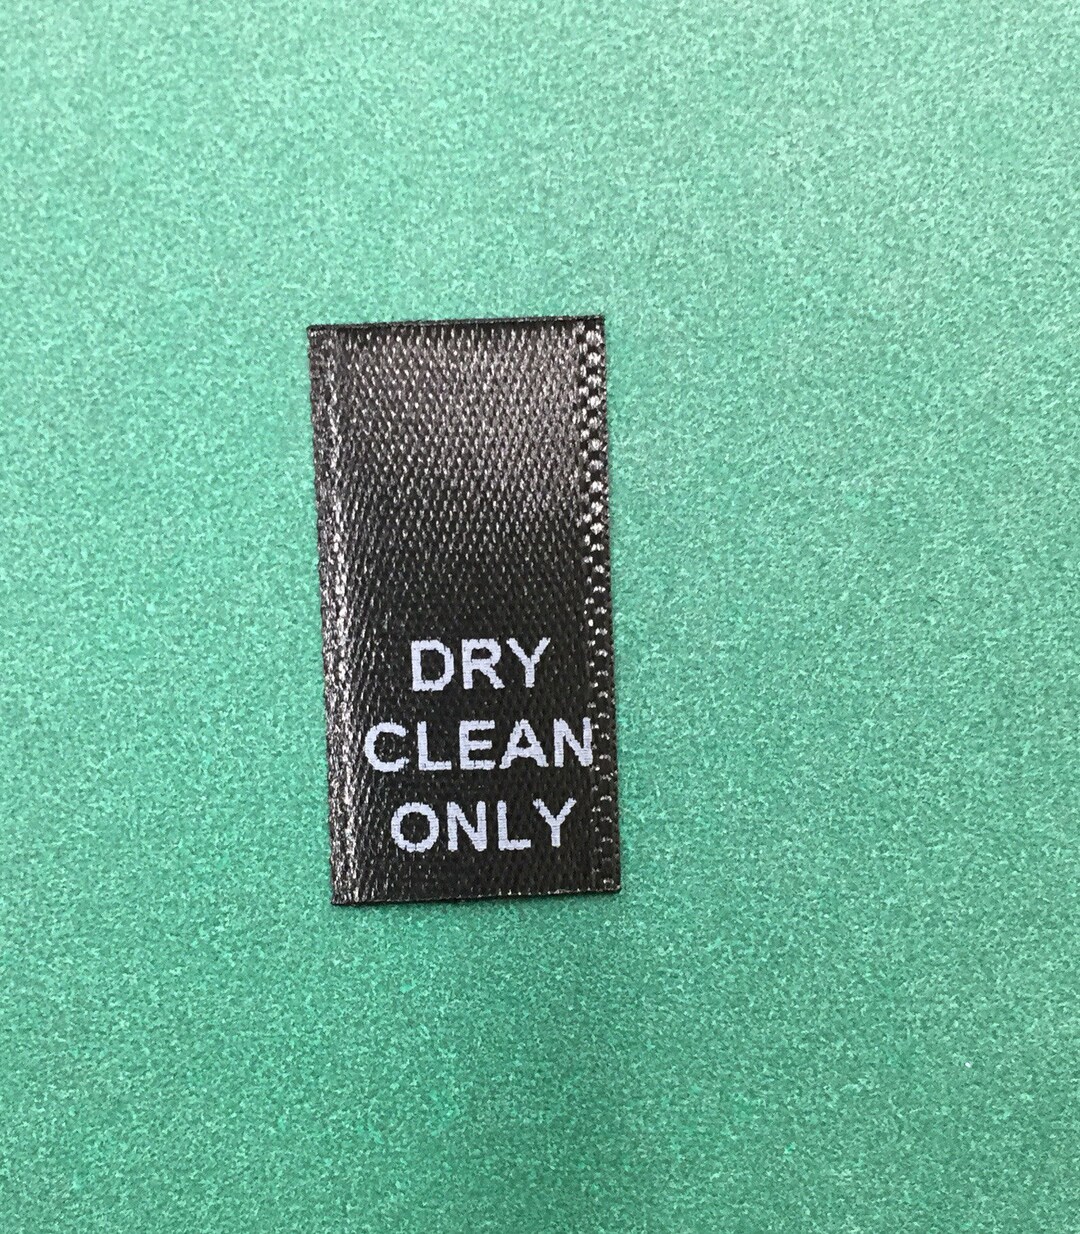 100 Pcs of DRY CLEAN ONLY Printed Black Satin Care Label - Etsy